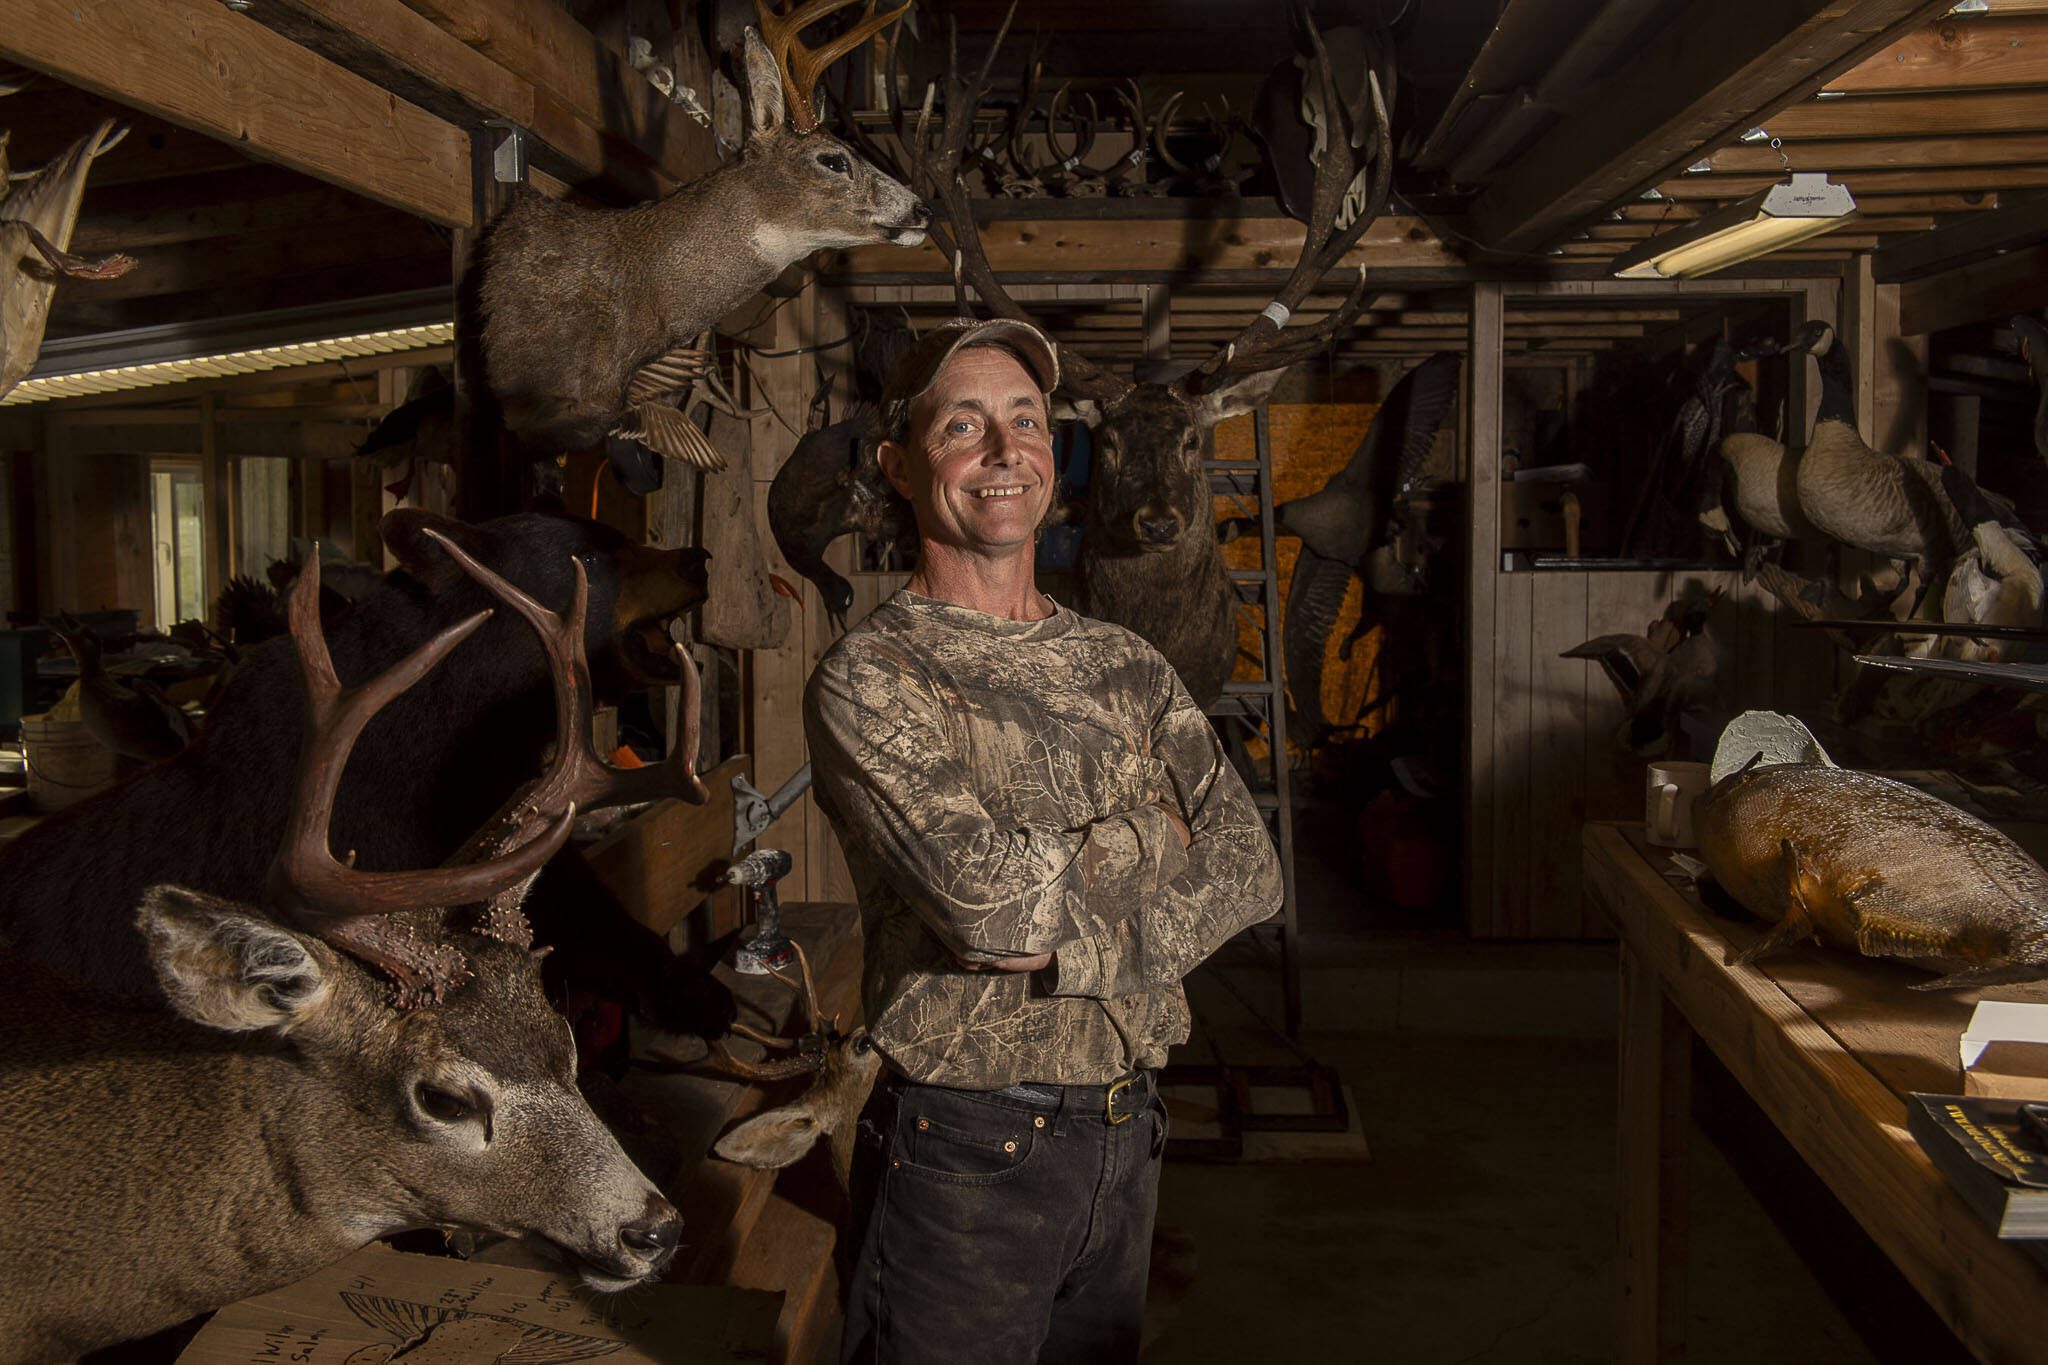 Steve Moro, 52, poses for a photo at his business workspace for Anitomical Creation/Woods Creek Taxidermy in Snohomish, Washington on Thursday, Oct. 12, 2023. (Annie Barker / The Herald)